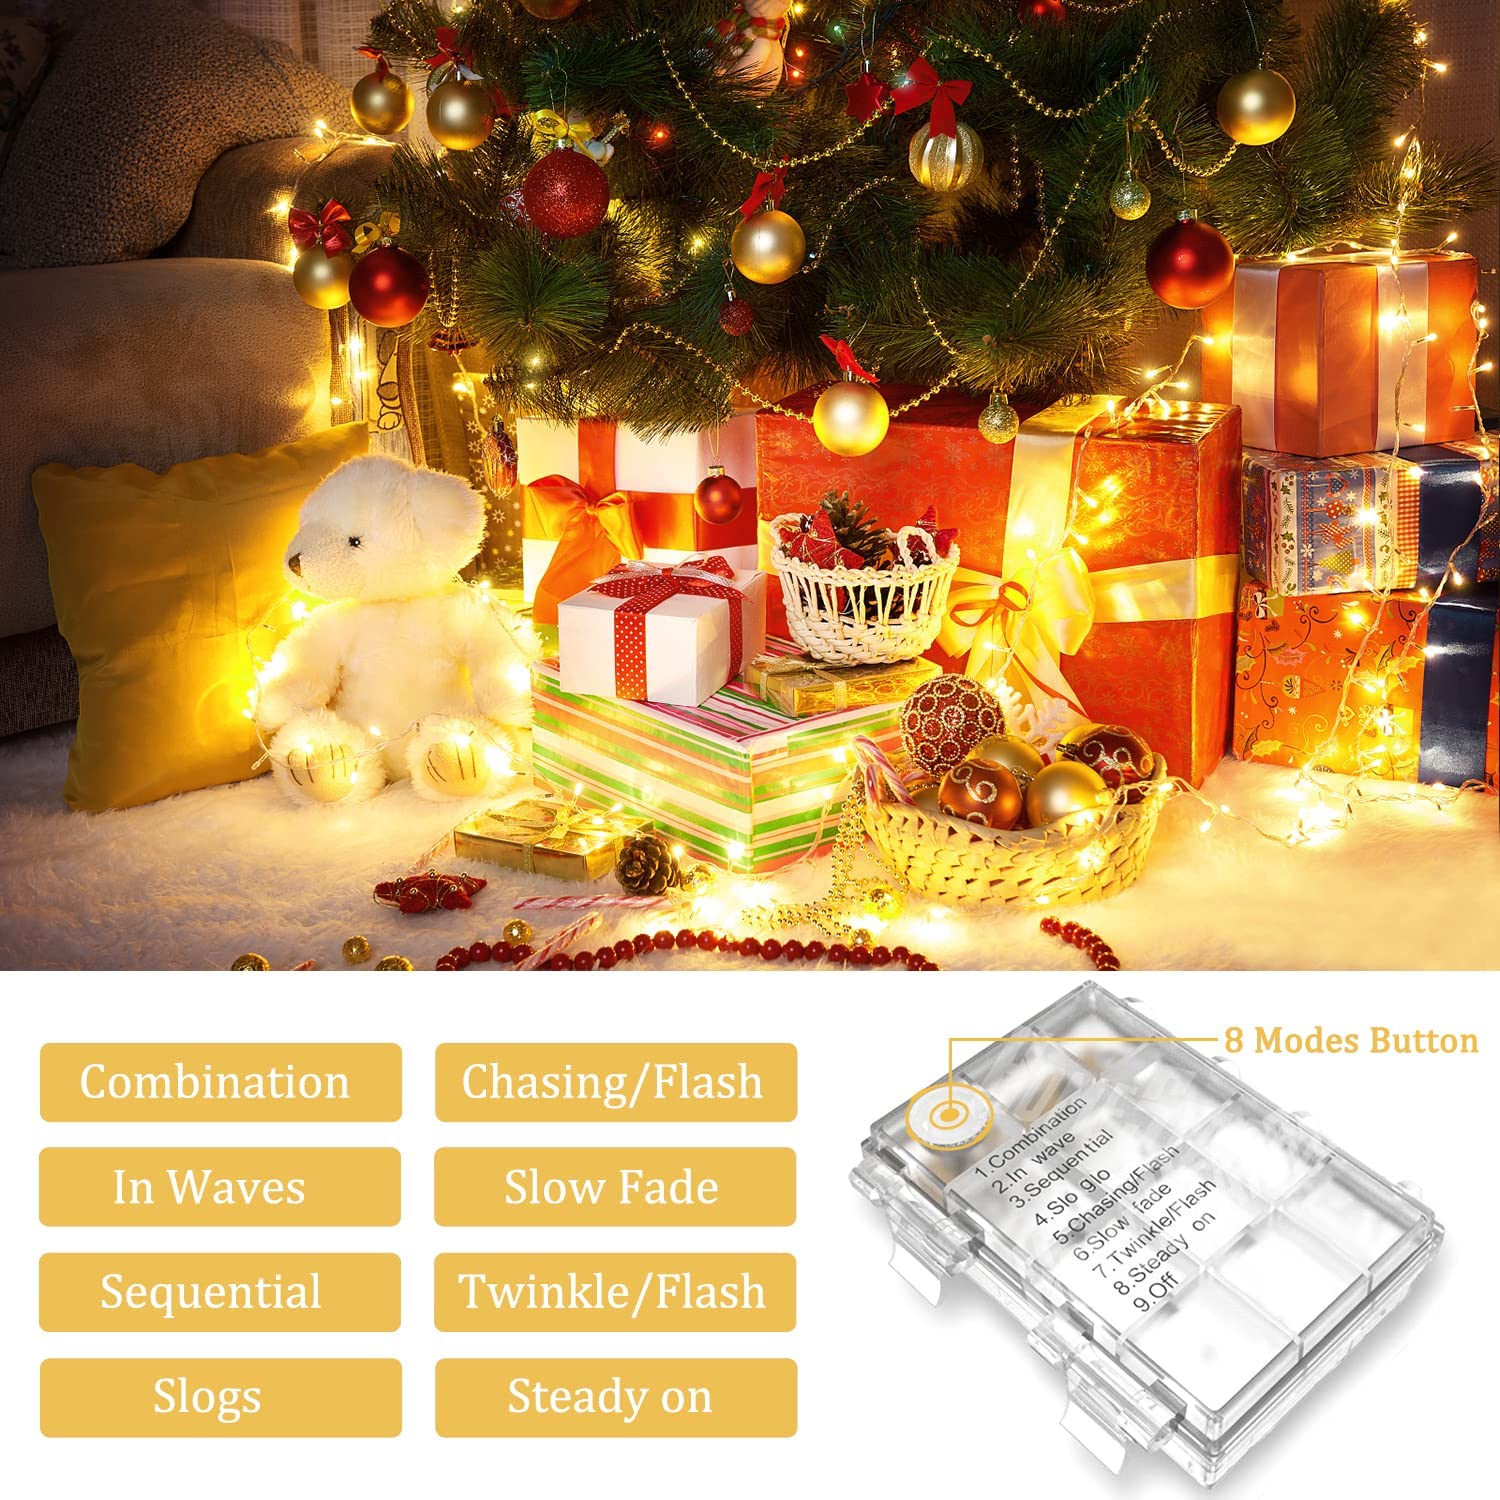 GooingTop Led Christmas Lights Outdoor Battery Operated,42.6ft 130LED Fairy Lights Waterproof with 8Modes,Twinkle Lights for Party Patio Christmas Decorations Outdoor(Warm White) - image 3 of 6